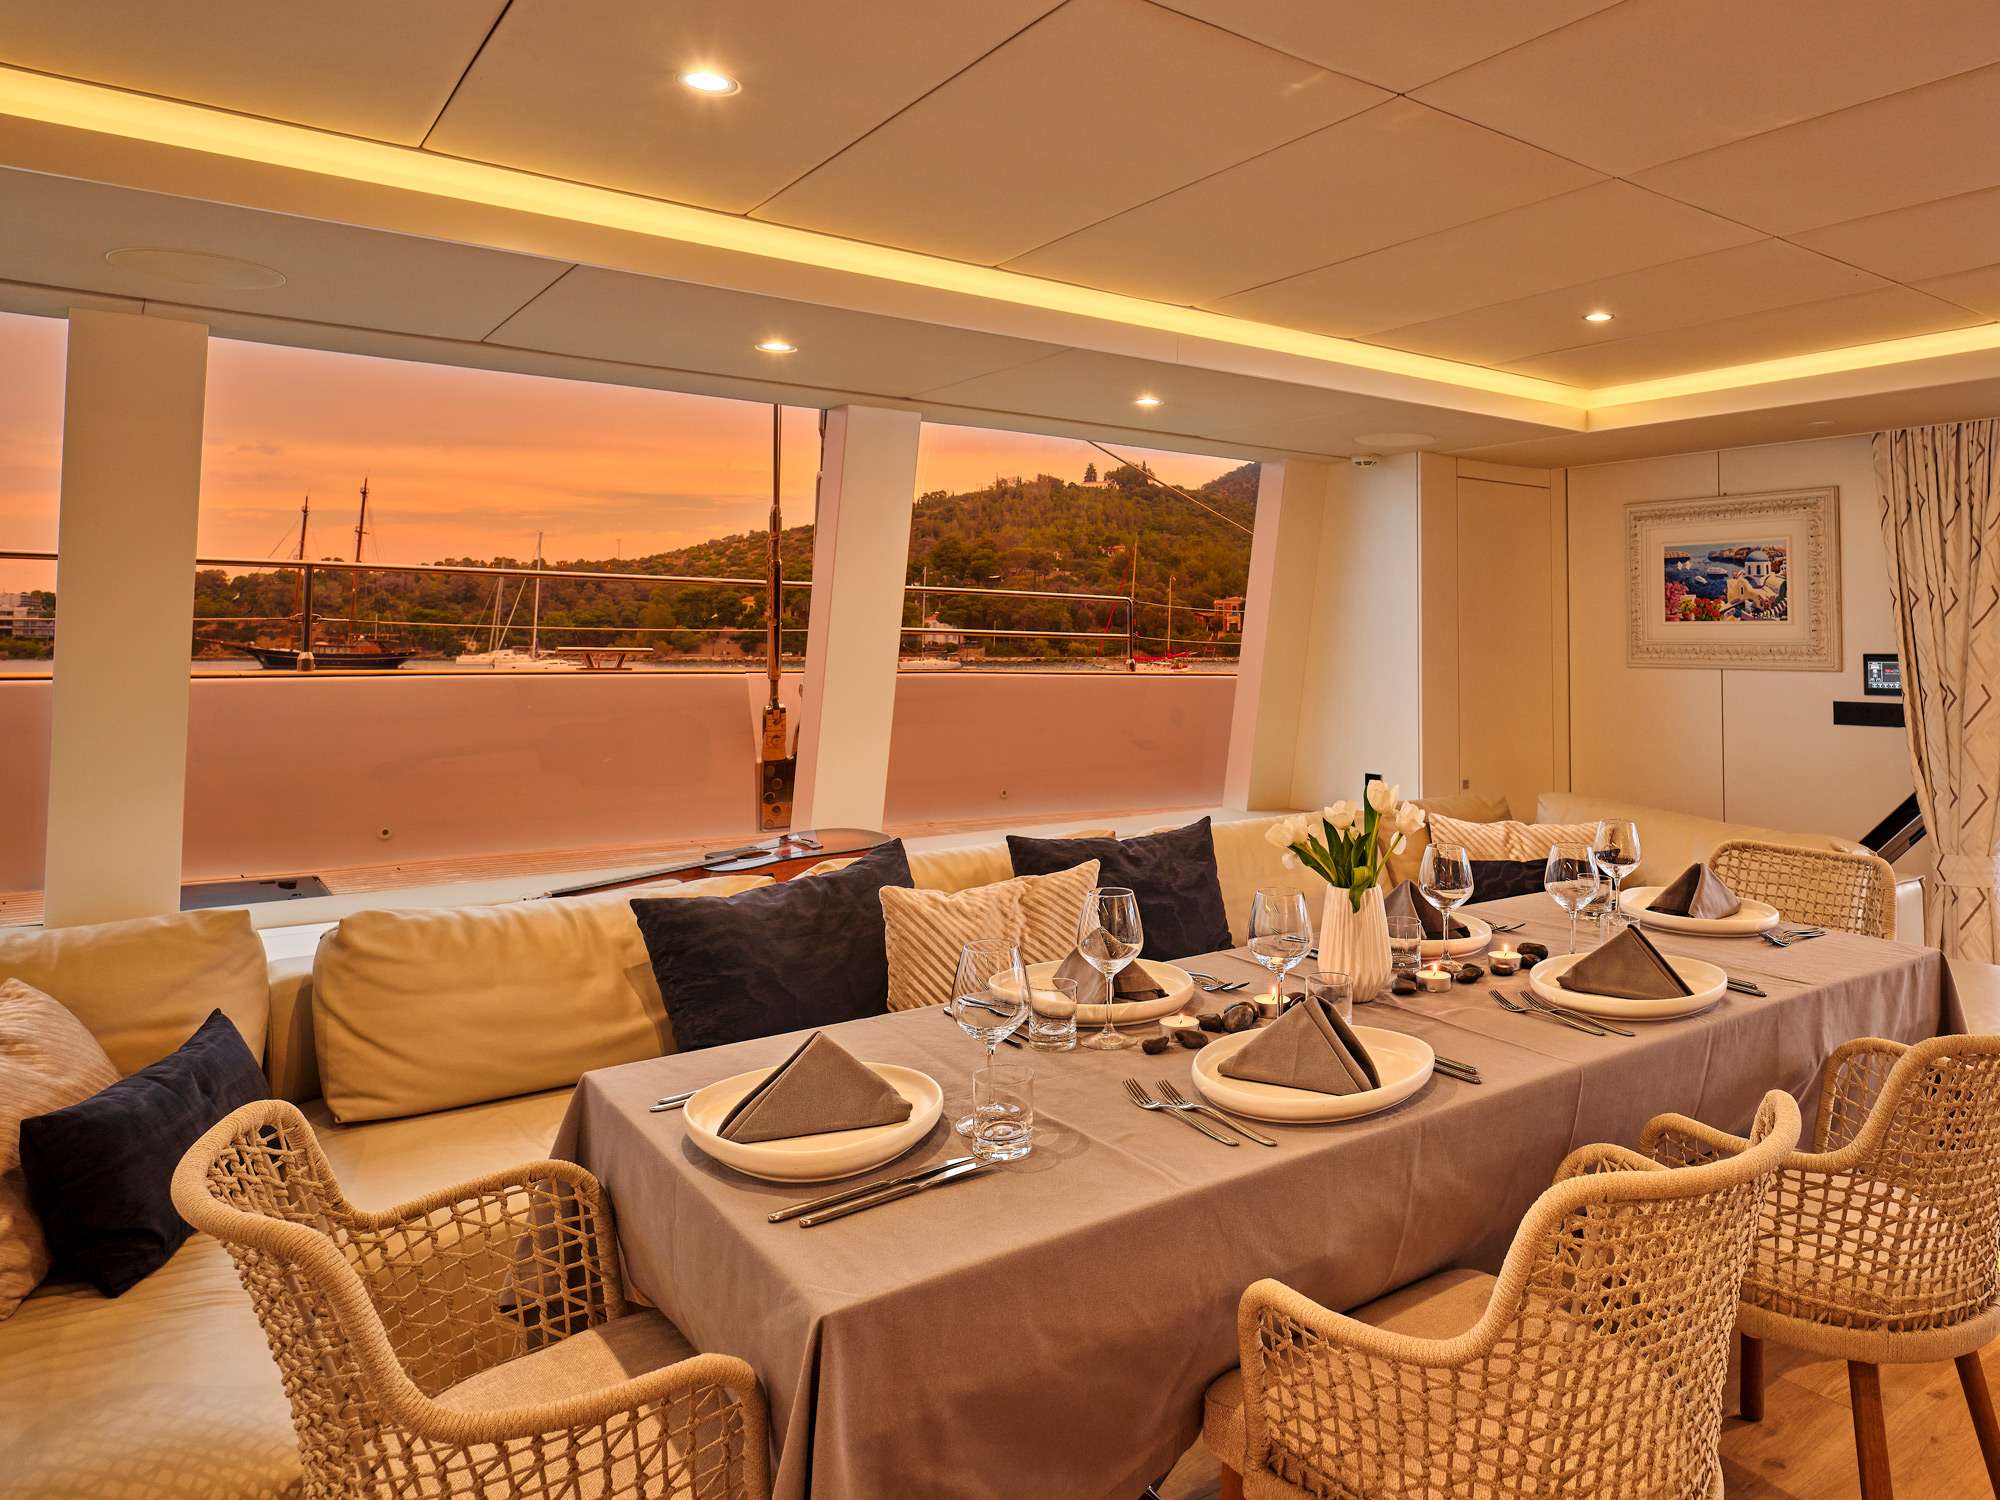 GENNY Yacht Charter - Main saloon convertible table for indoor dining